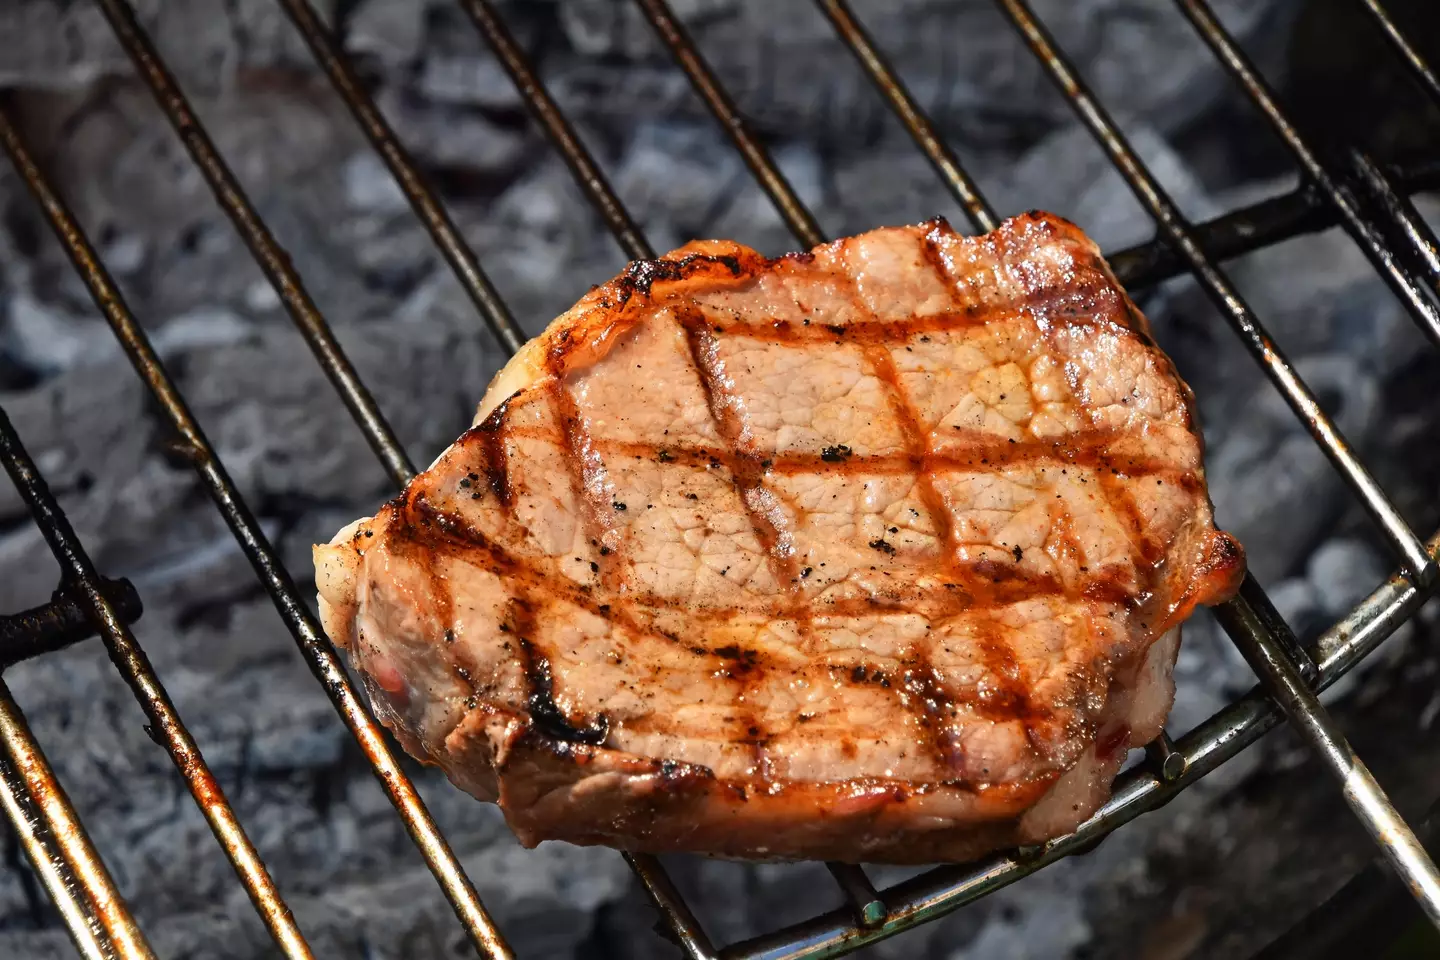 A 'sick and upset' vegan has sent yet another angry letter to their neighbour over a barbecue.